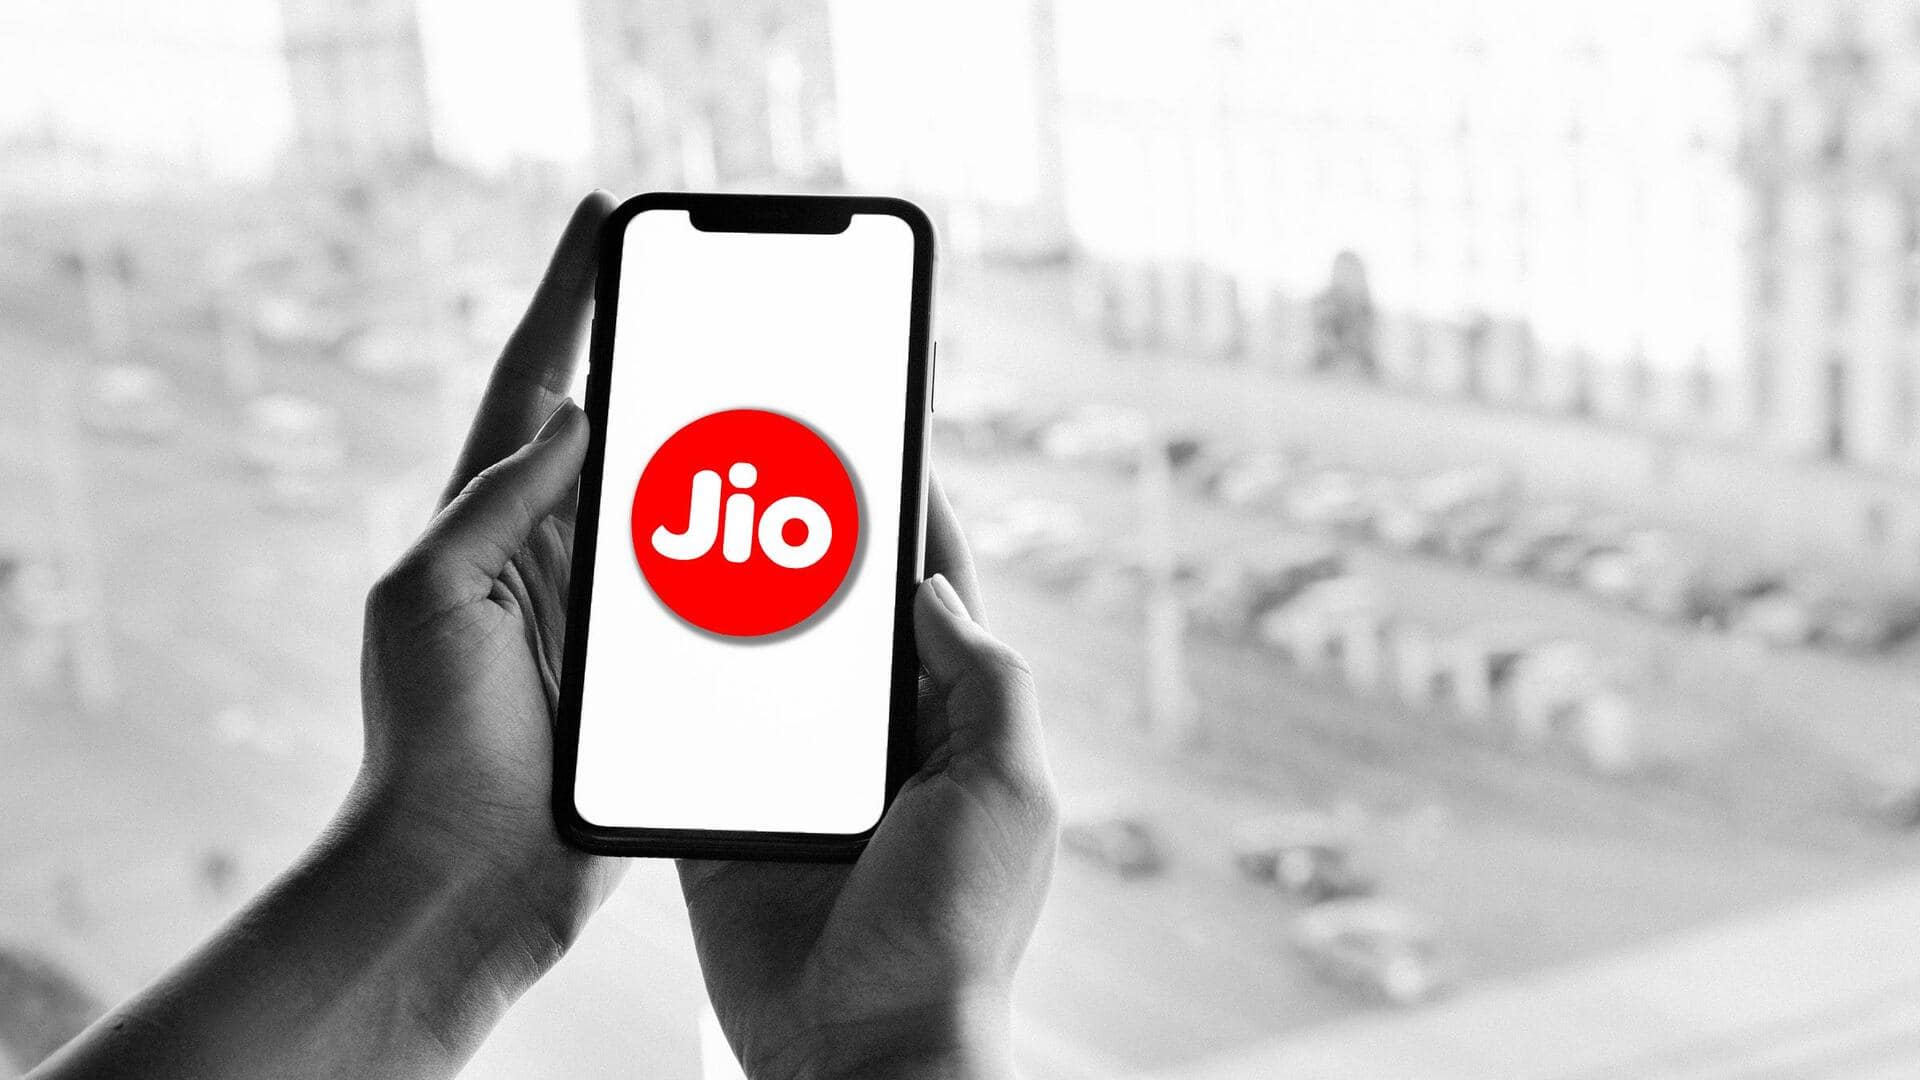 Jio users experience widespread internet outage across India